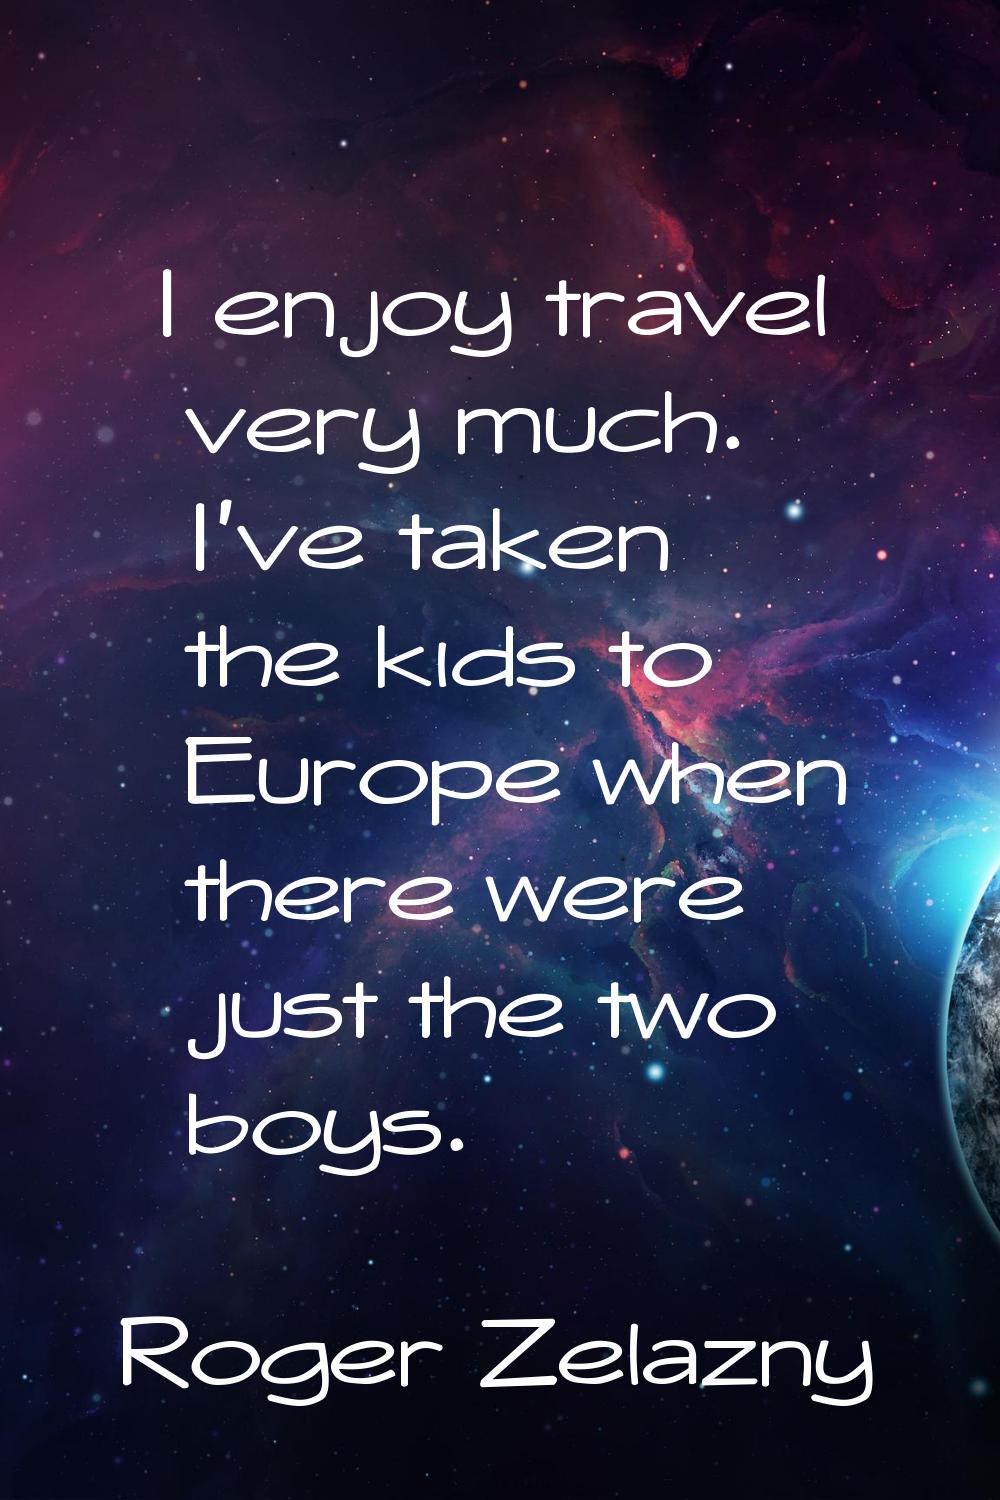 I enjoy travel very much. I've taken the kids to Europe when there were just the two boys.